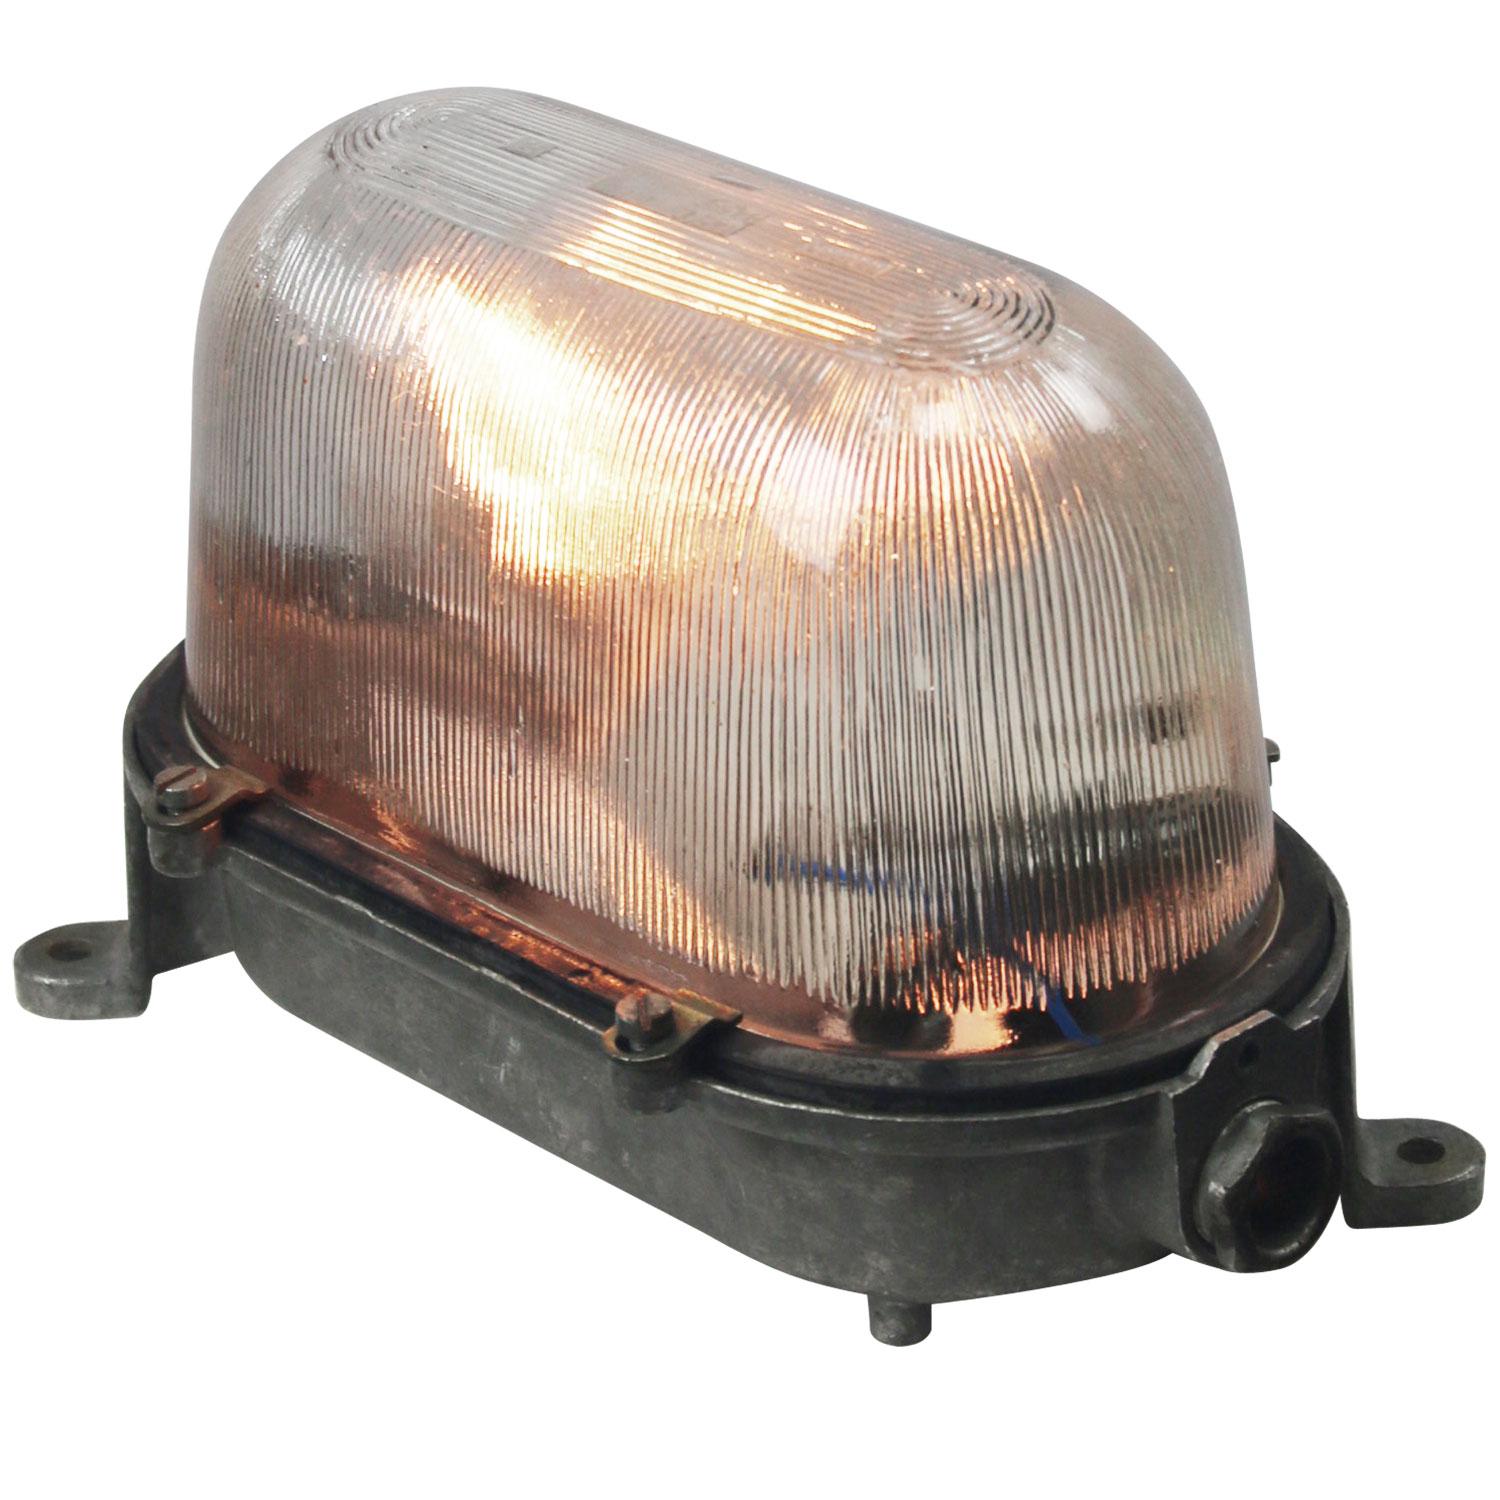 Industrial wall, scone or ceiling lamp
Cast aluminum, Holophane glass

Weight: 1.40 kg / 3.1 lb

Priced per individual item. All lamps have been made suitable by international standards for incandescent light bulbs, energy-efficient and LED